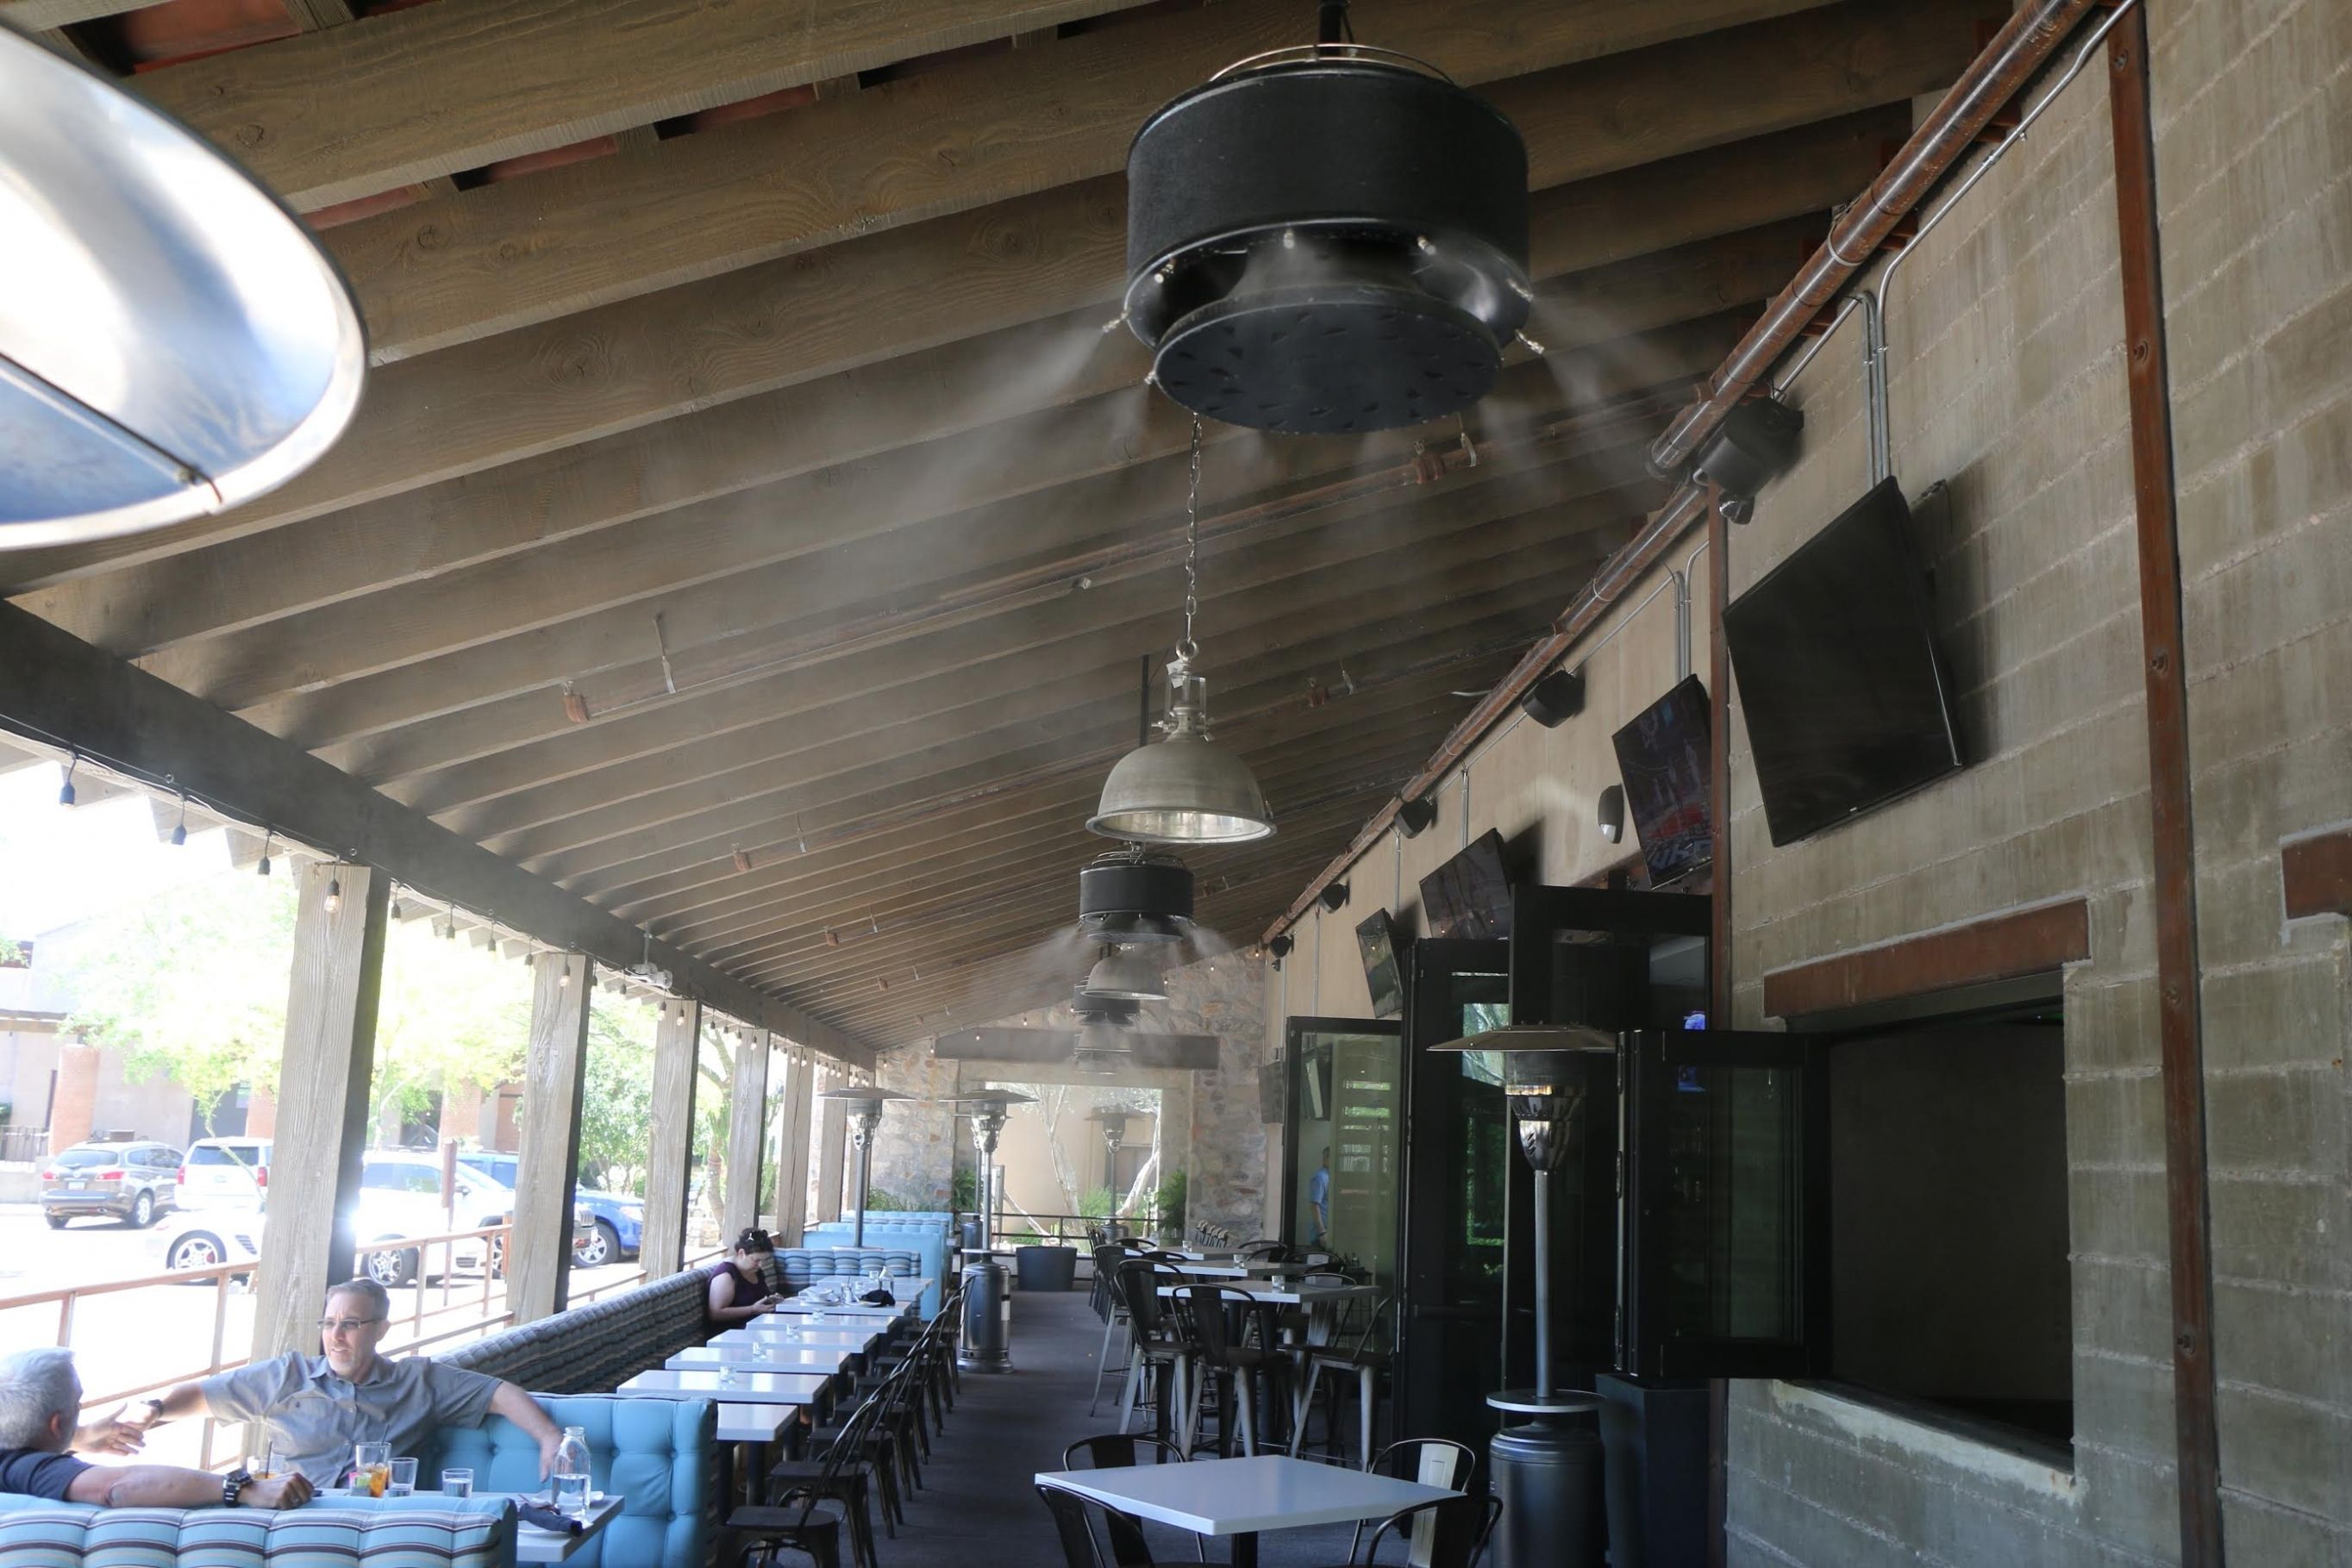 Famous Outdoor: Gigantic Outdoor Ceiling Fans With Misters Mistamerica With Regard To Outdoor Ceiling Fans With Misters (View 1 of 20)